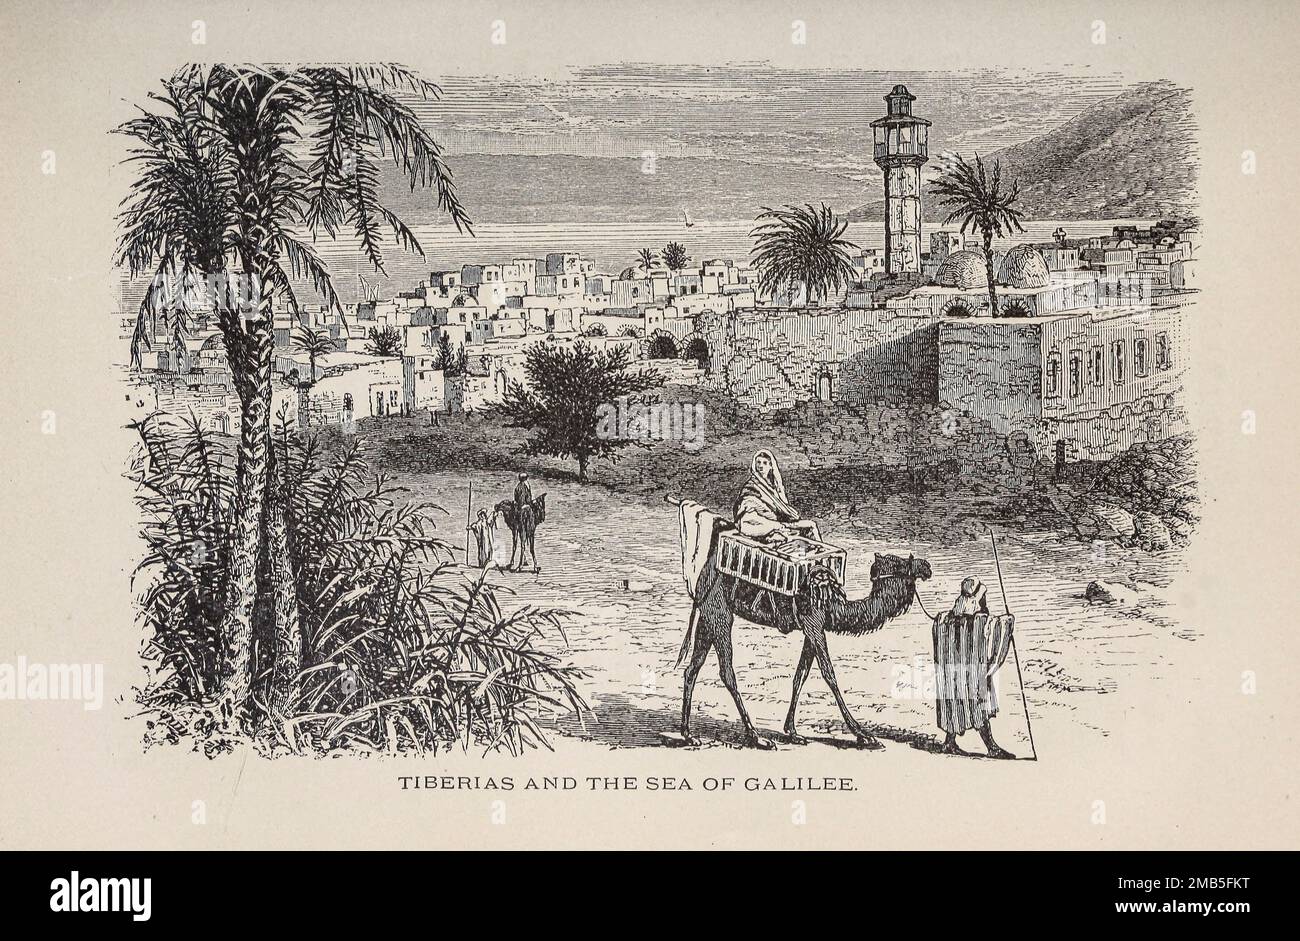 Tiberias and the Sea of Galilee engraving from the book ' Through Bible lands : notes of travel in Egypt, the desert, and Palestine ' by Philip Schaff, 1819-1893 Publisher New York : American Tract Society 1878 Stock Photo